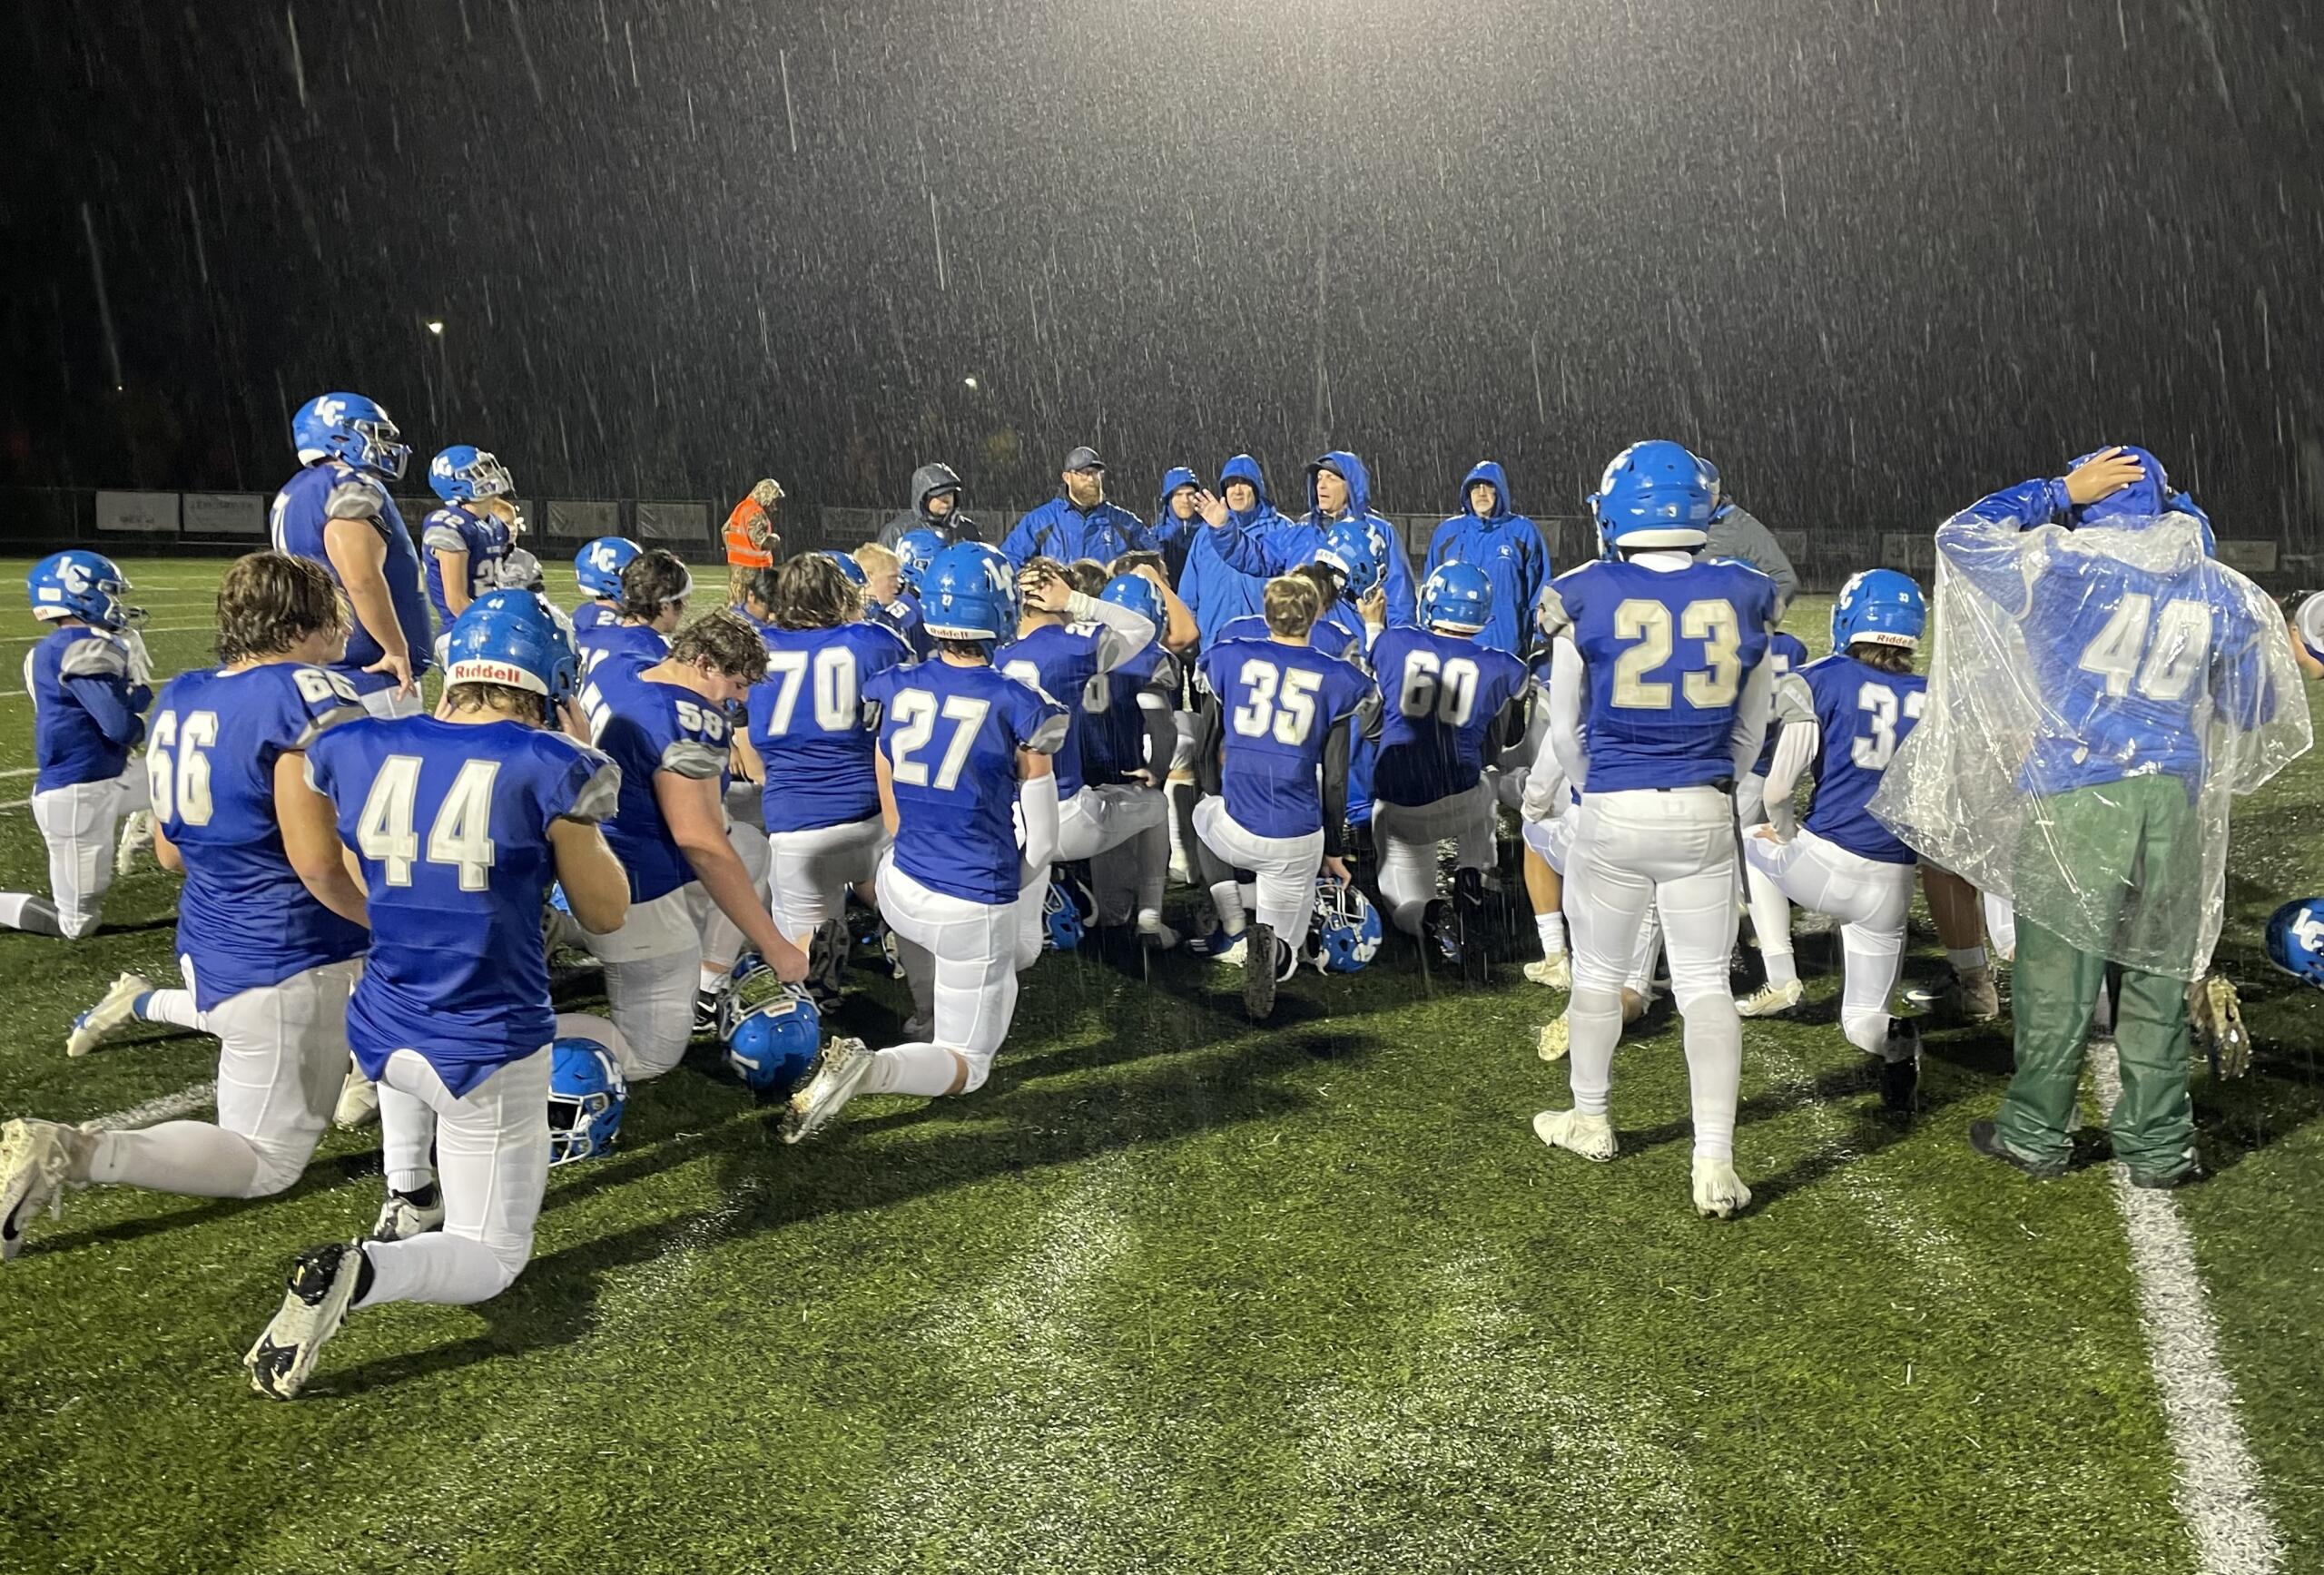 La Center head coach John Lambert addresses his team in the post-game huddle after the Wildcats' 63-14 win over Hoquiam in Week 10 on Nov. 4, 2022, at Woodland High School.